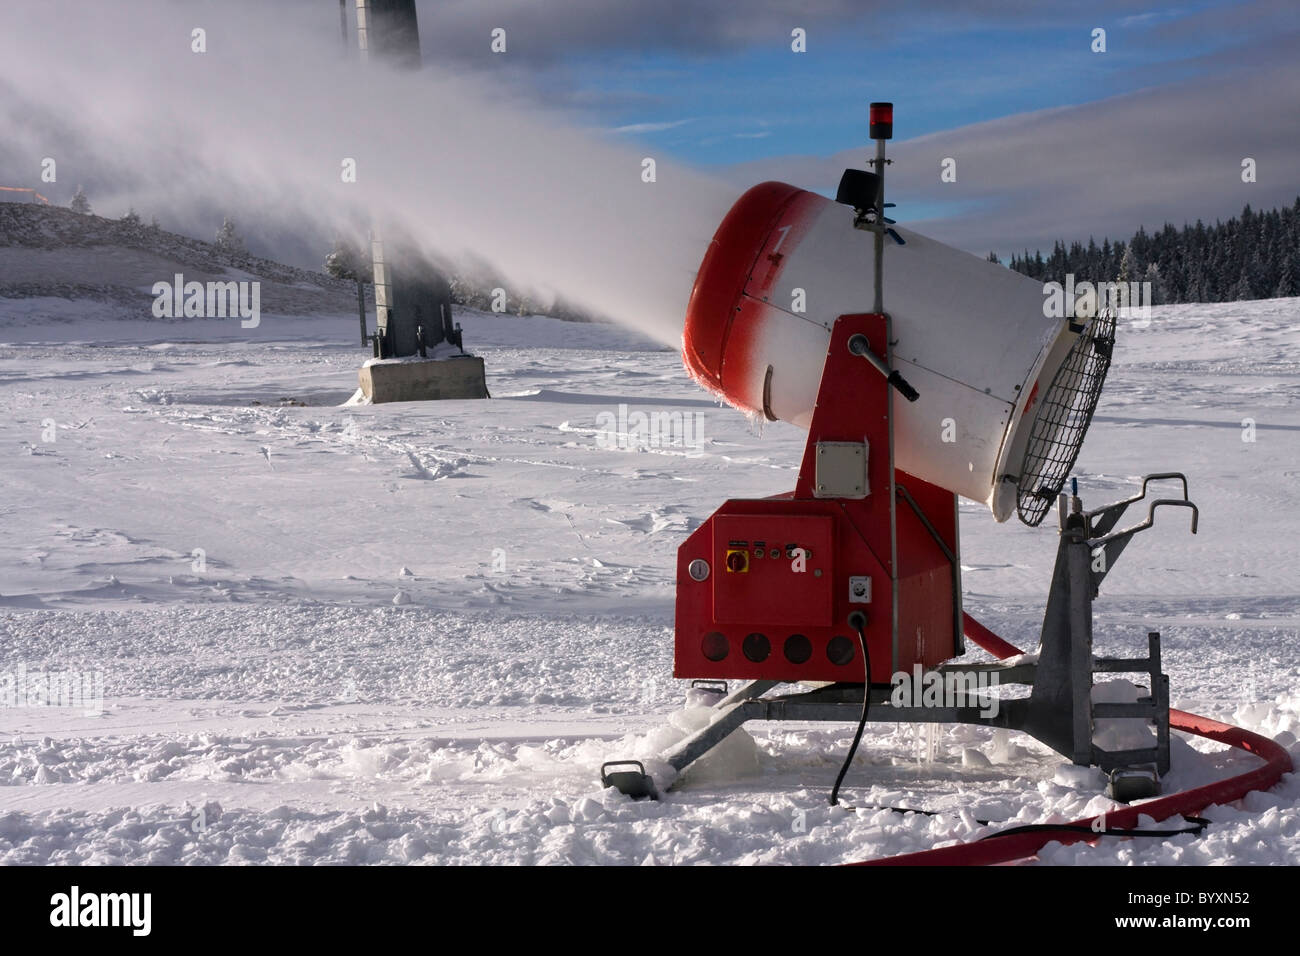 Closeup of the snow making machine in action with control pannel. Stock Photo